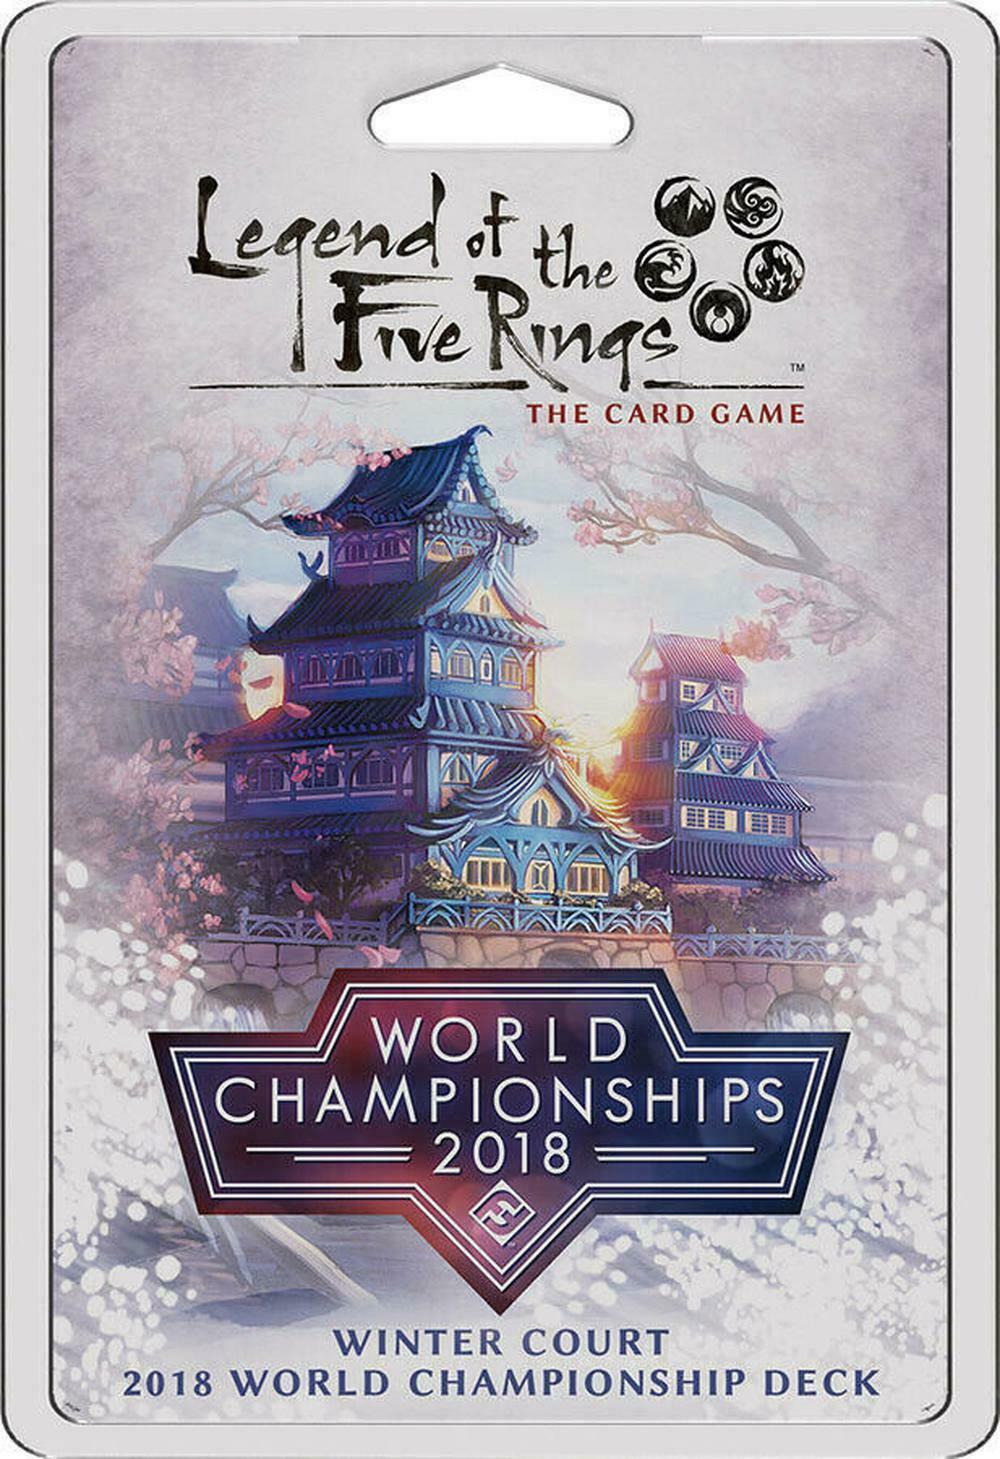 Legend of the Five Rings: The Card Game - Winter Court - 2018 World Championship Deck